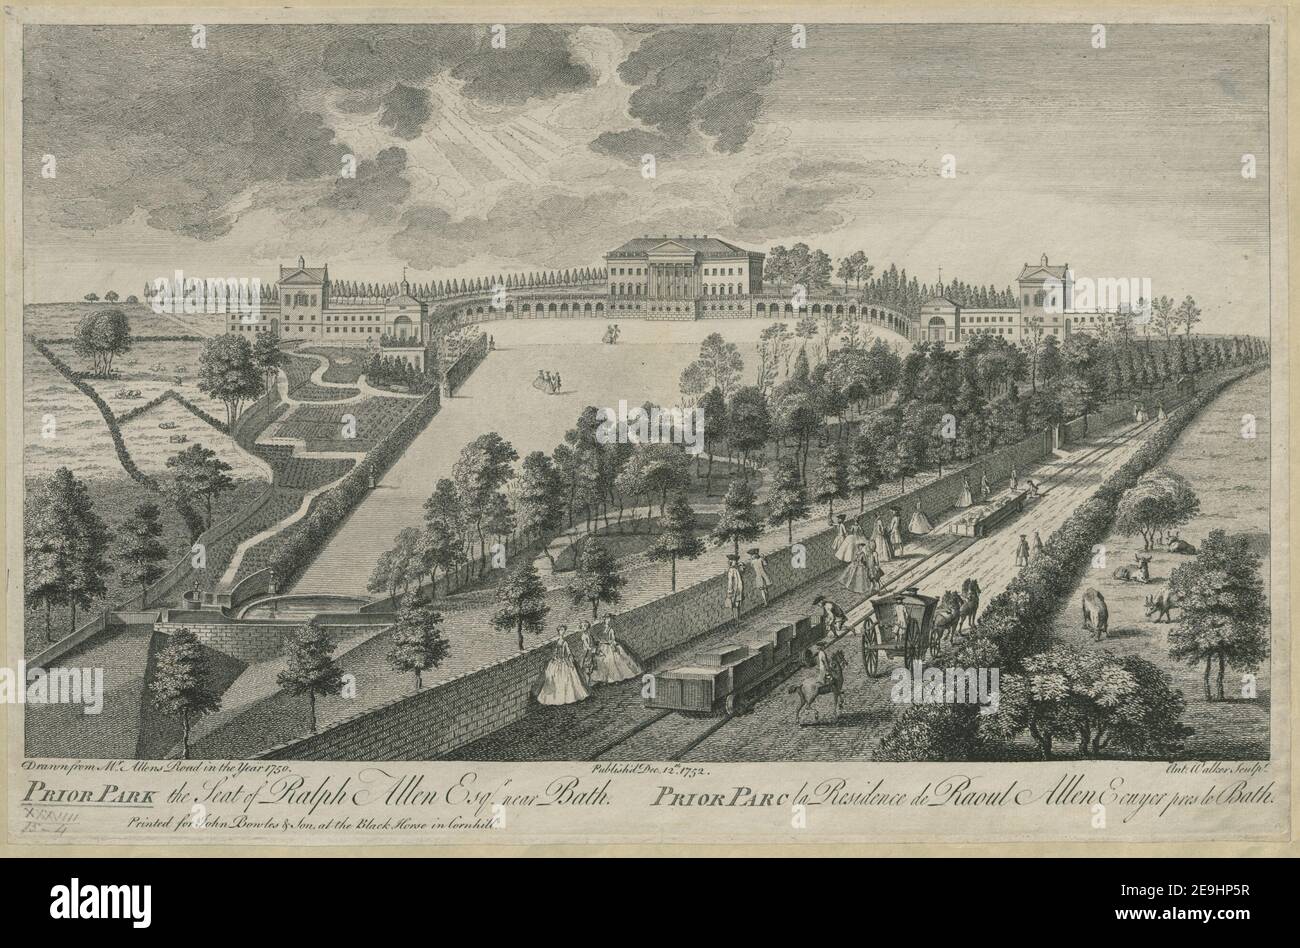 PRIOR PARK the Seat of Ralph Allen Esqr near Bath = PRIOR PARC la Residence de Raoul Allen Ecuyer pres le Bath.  Author  Walker, Anthony 38.15.4. Place of publication: [London] Publisher: Printed for John Bowles , Son at the Black Horse in Cornhill., Date of publication: Publish'd Dec 12th 1752.  Item type: 1 print Medium: etching and engraving Dimensions: sheet 28.5 x 43.7 cm platemark; sheet  Former owner: George III, King of Great Britain, 1738-1820 Stock Photo